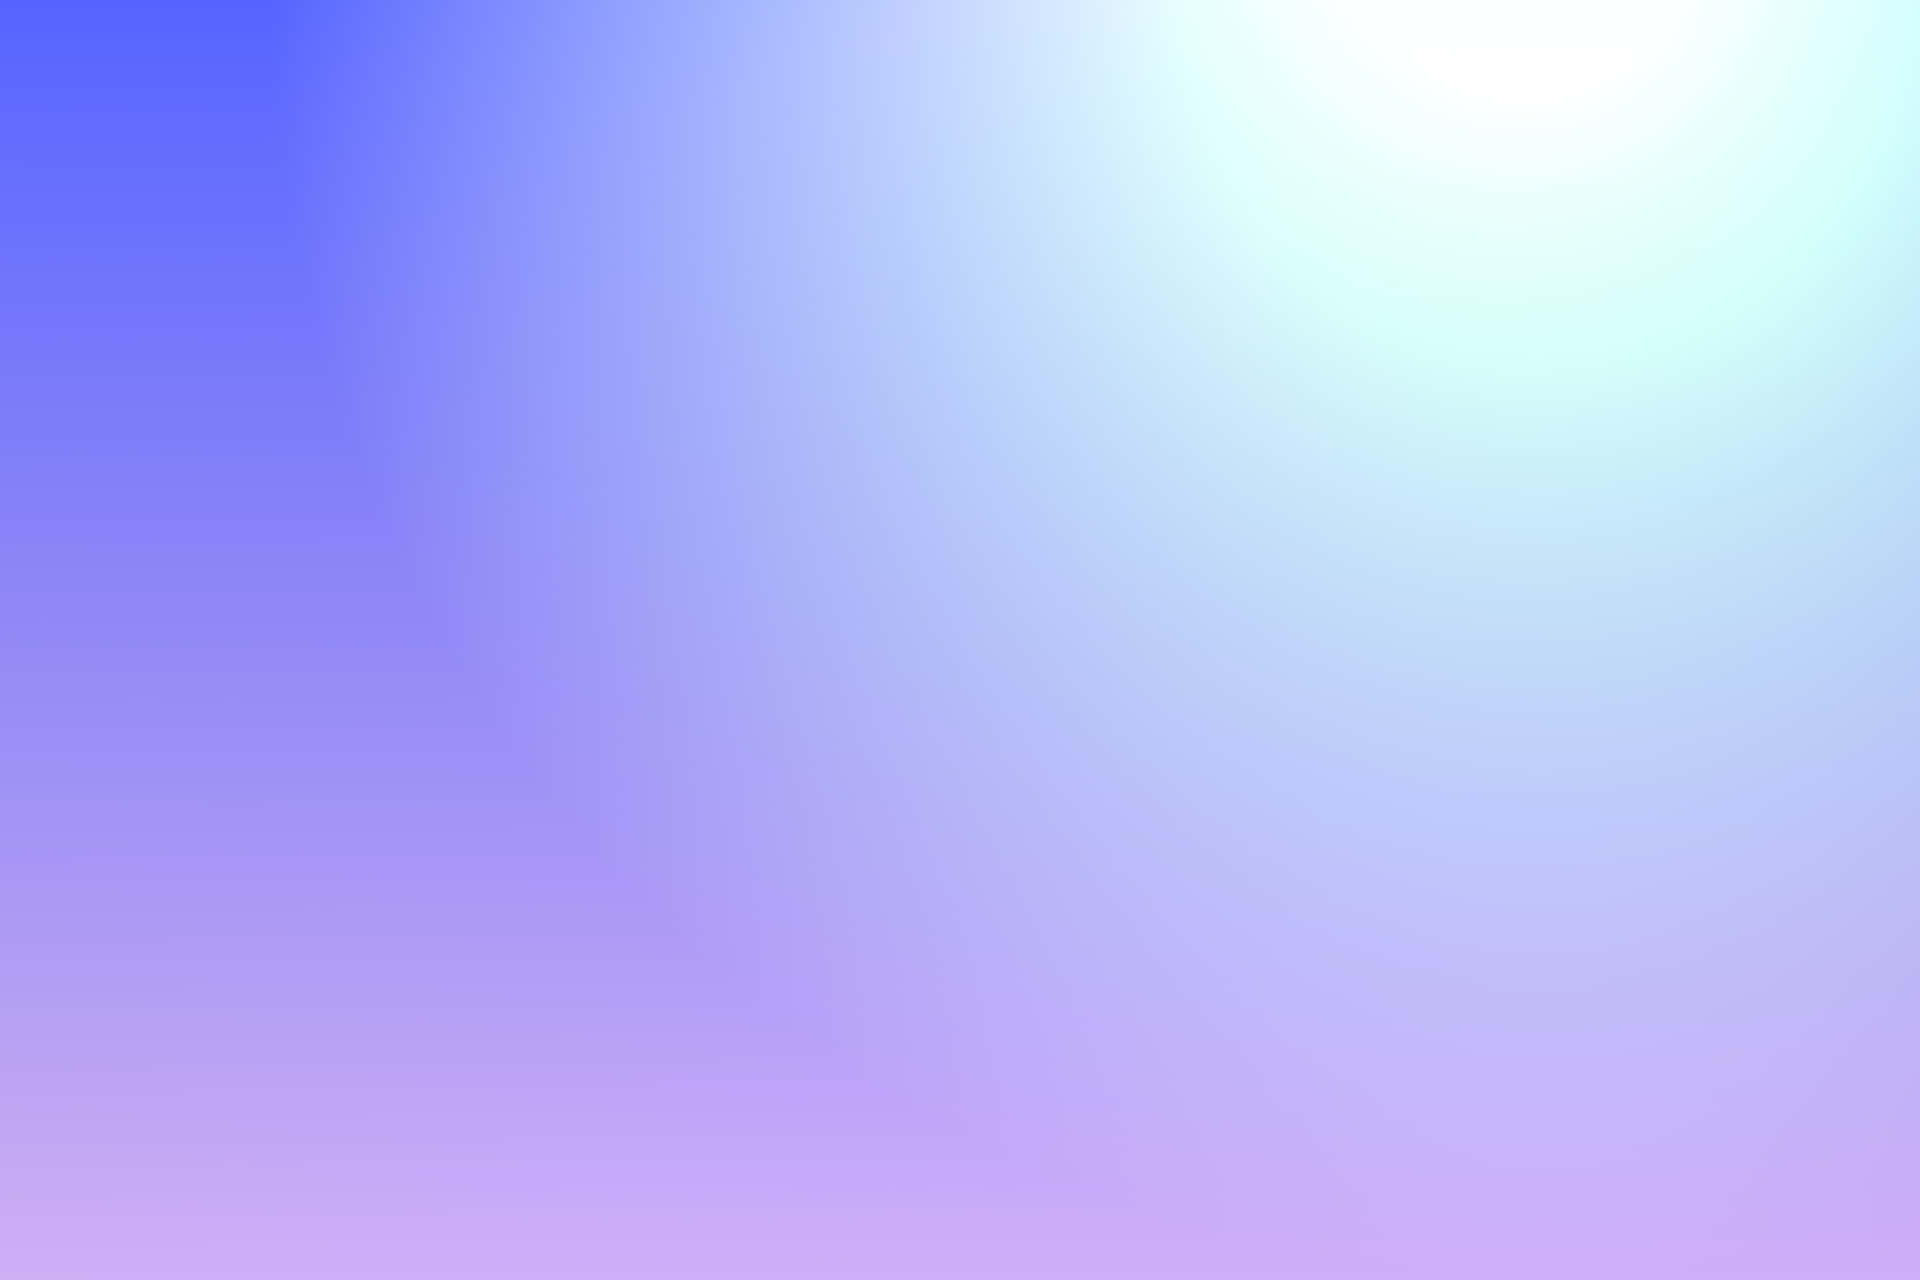 Eye-catching purple and blue ombre background Wallpaper